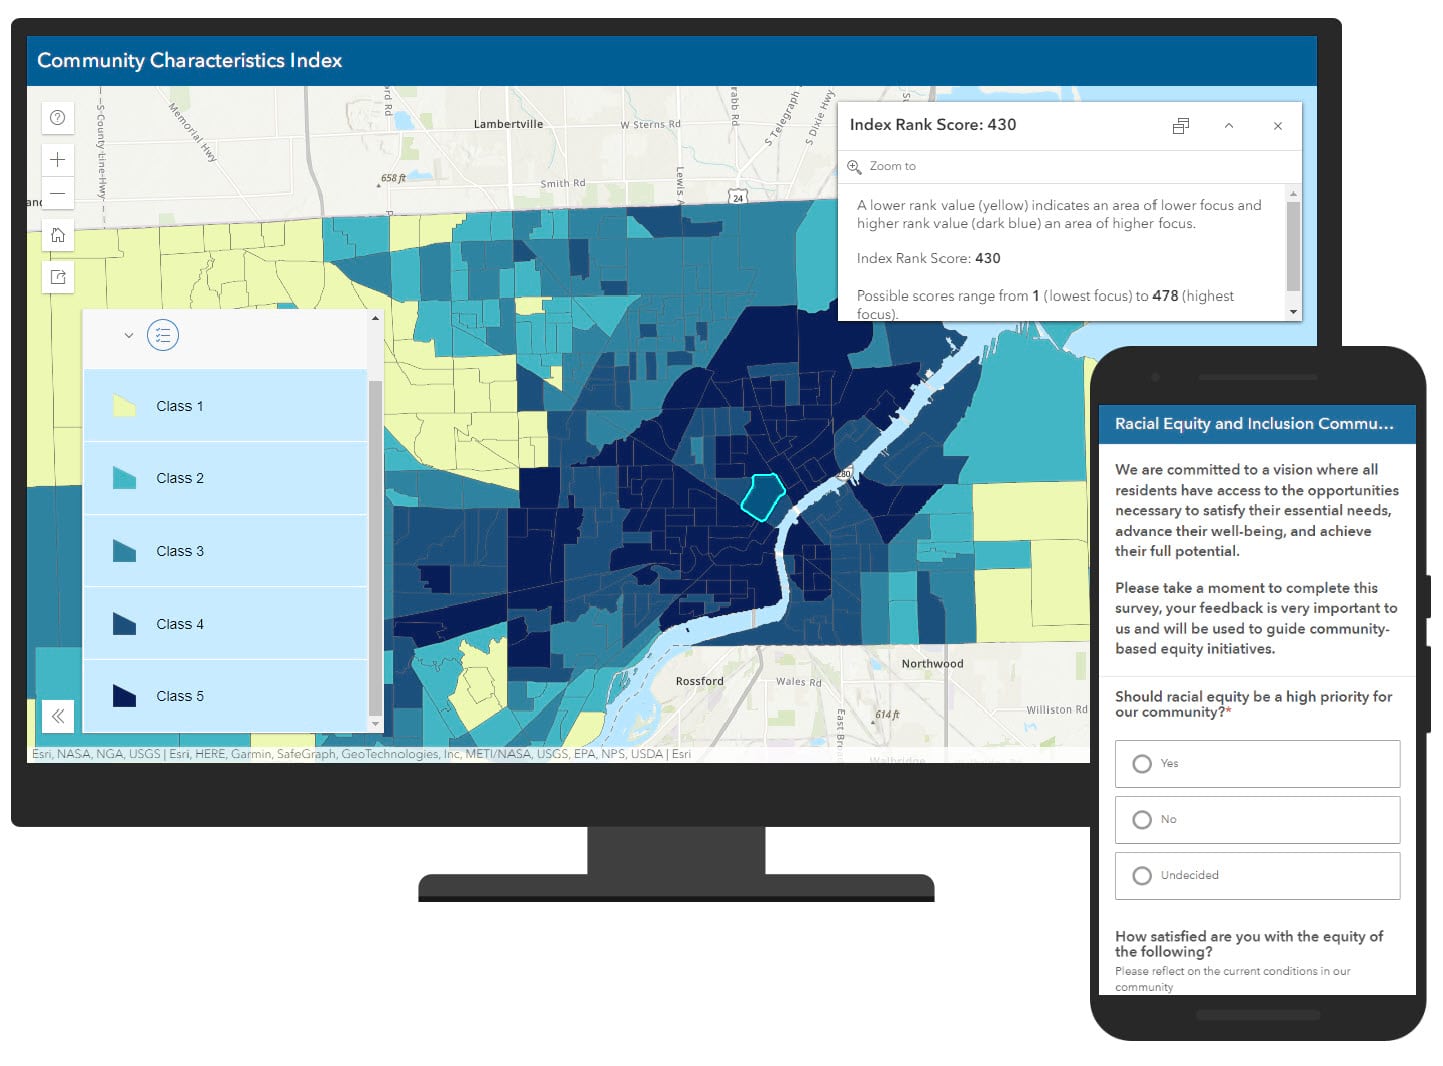 An image of the Community Characteristics Index web mapping application and a Racial Equity and Inclusion Survey123 form open on mobile in the foreground.